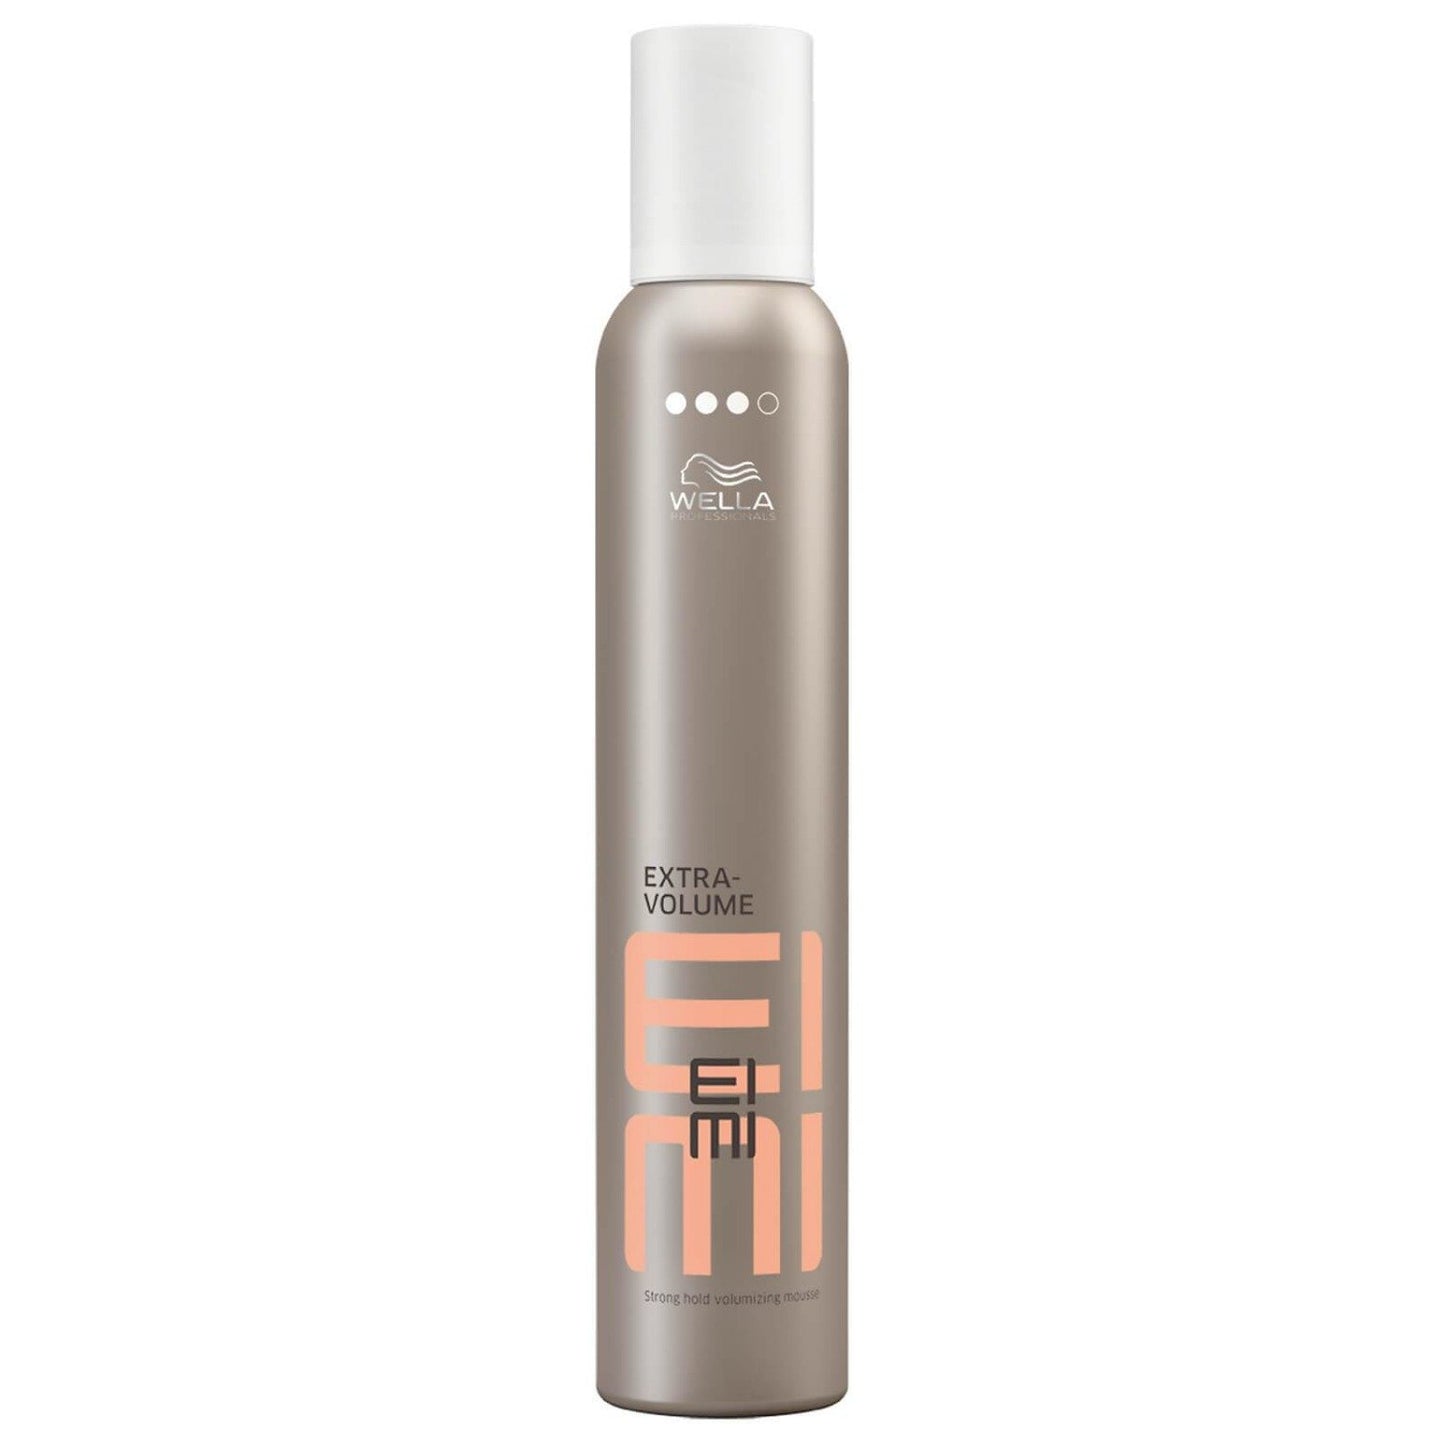 Wella Professionals EIMI Extra Volume Strong Hold Volumising Mousse 500ml (SHOP)